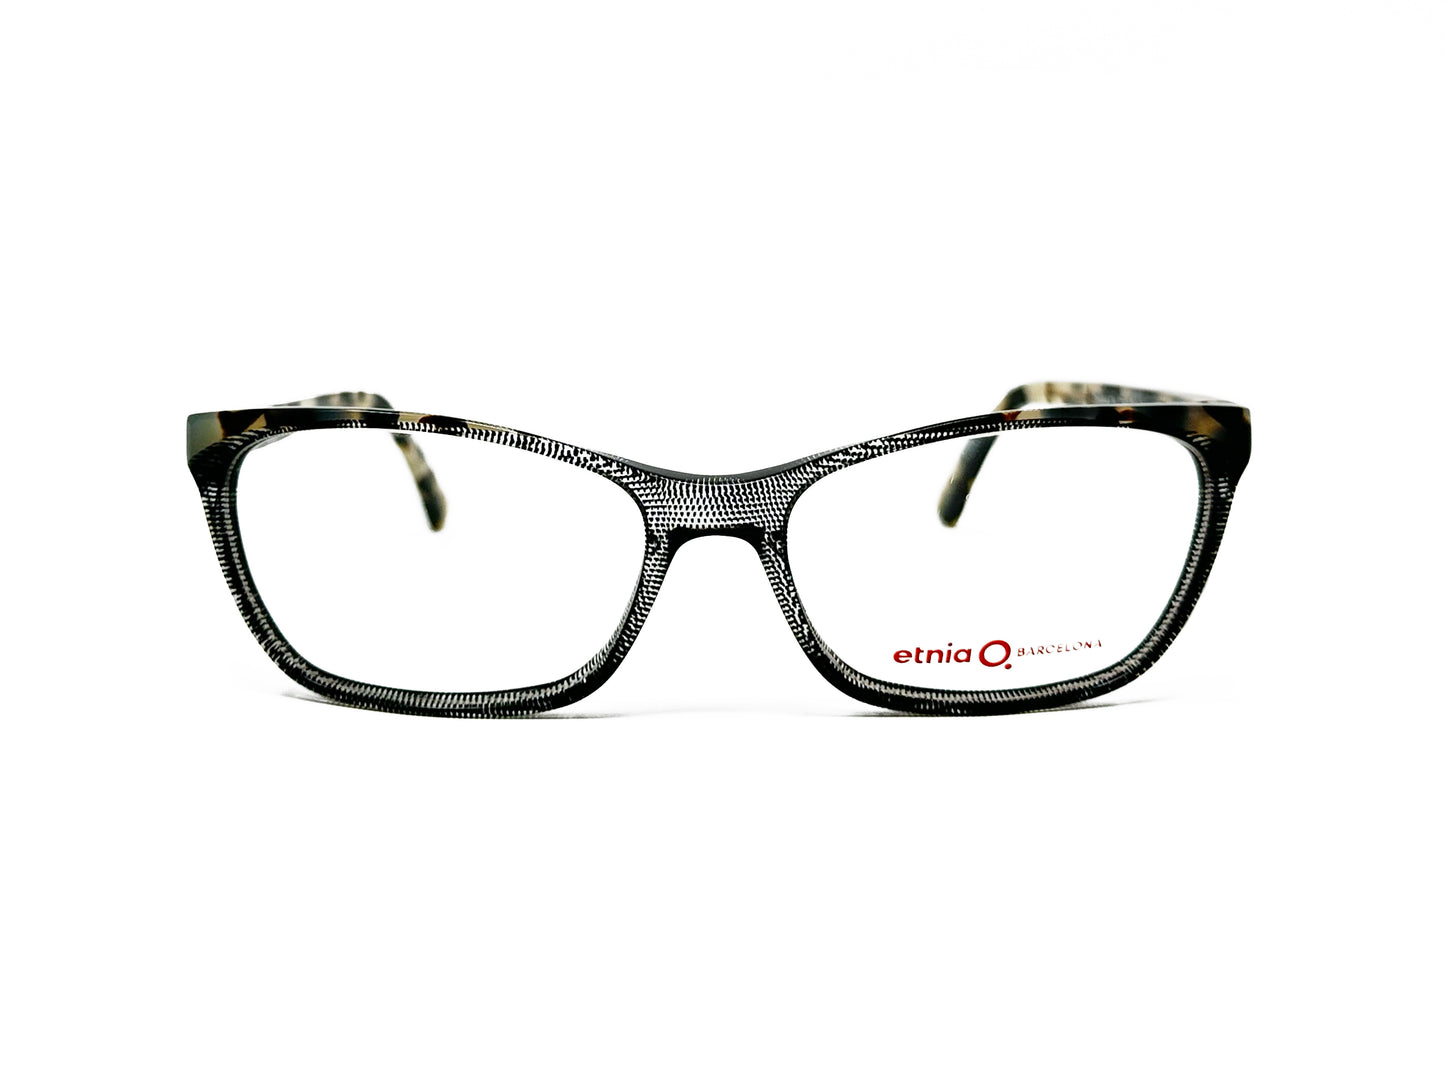 Etnia Barcelona narrow,  rectangular, cat-eye, acetate optical frame. Model: Nimes 15. Color: BKHV - Transparent with black dots in the center of frame, gradiated out into a tortoise on corners and side of frame. Front view. 